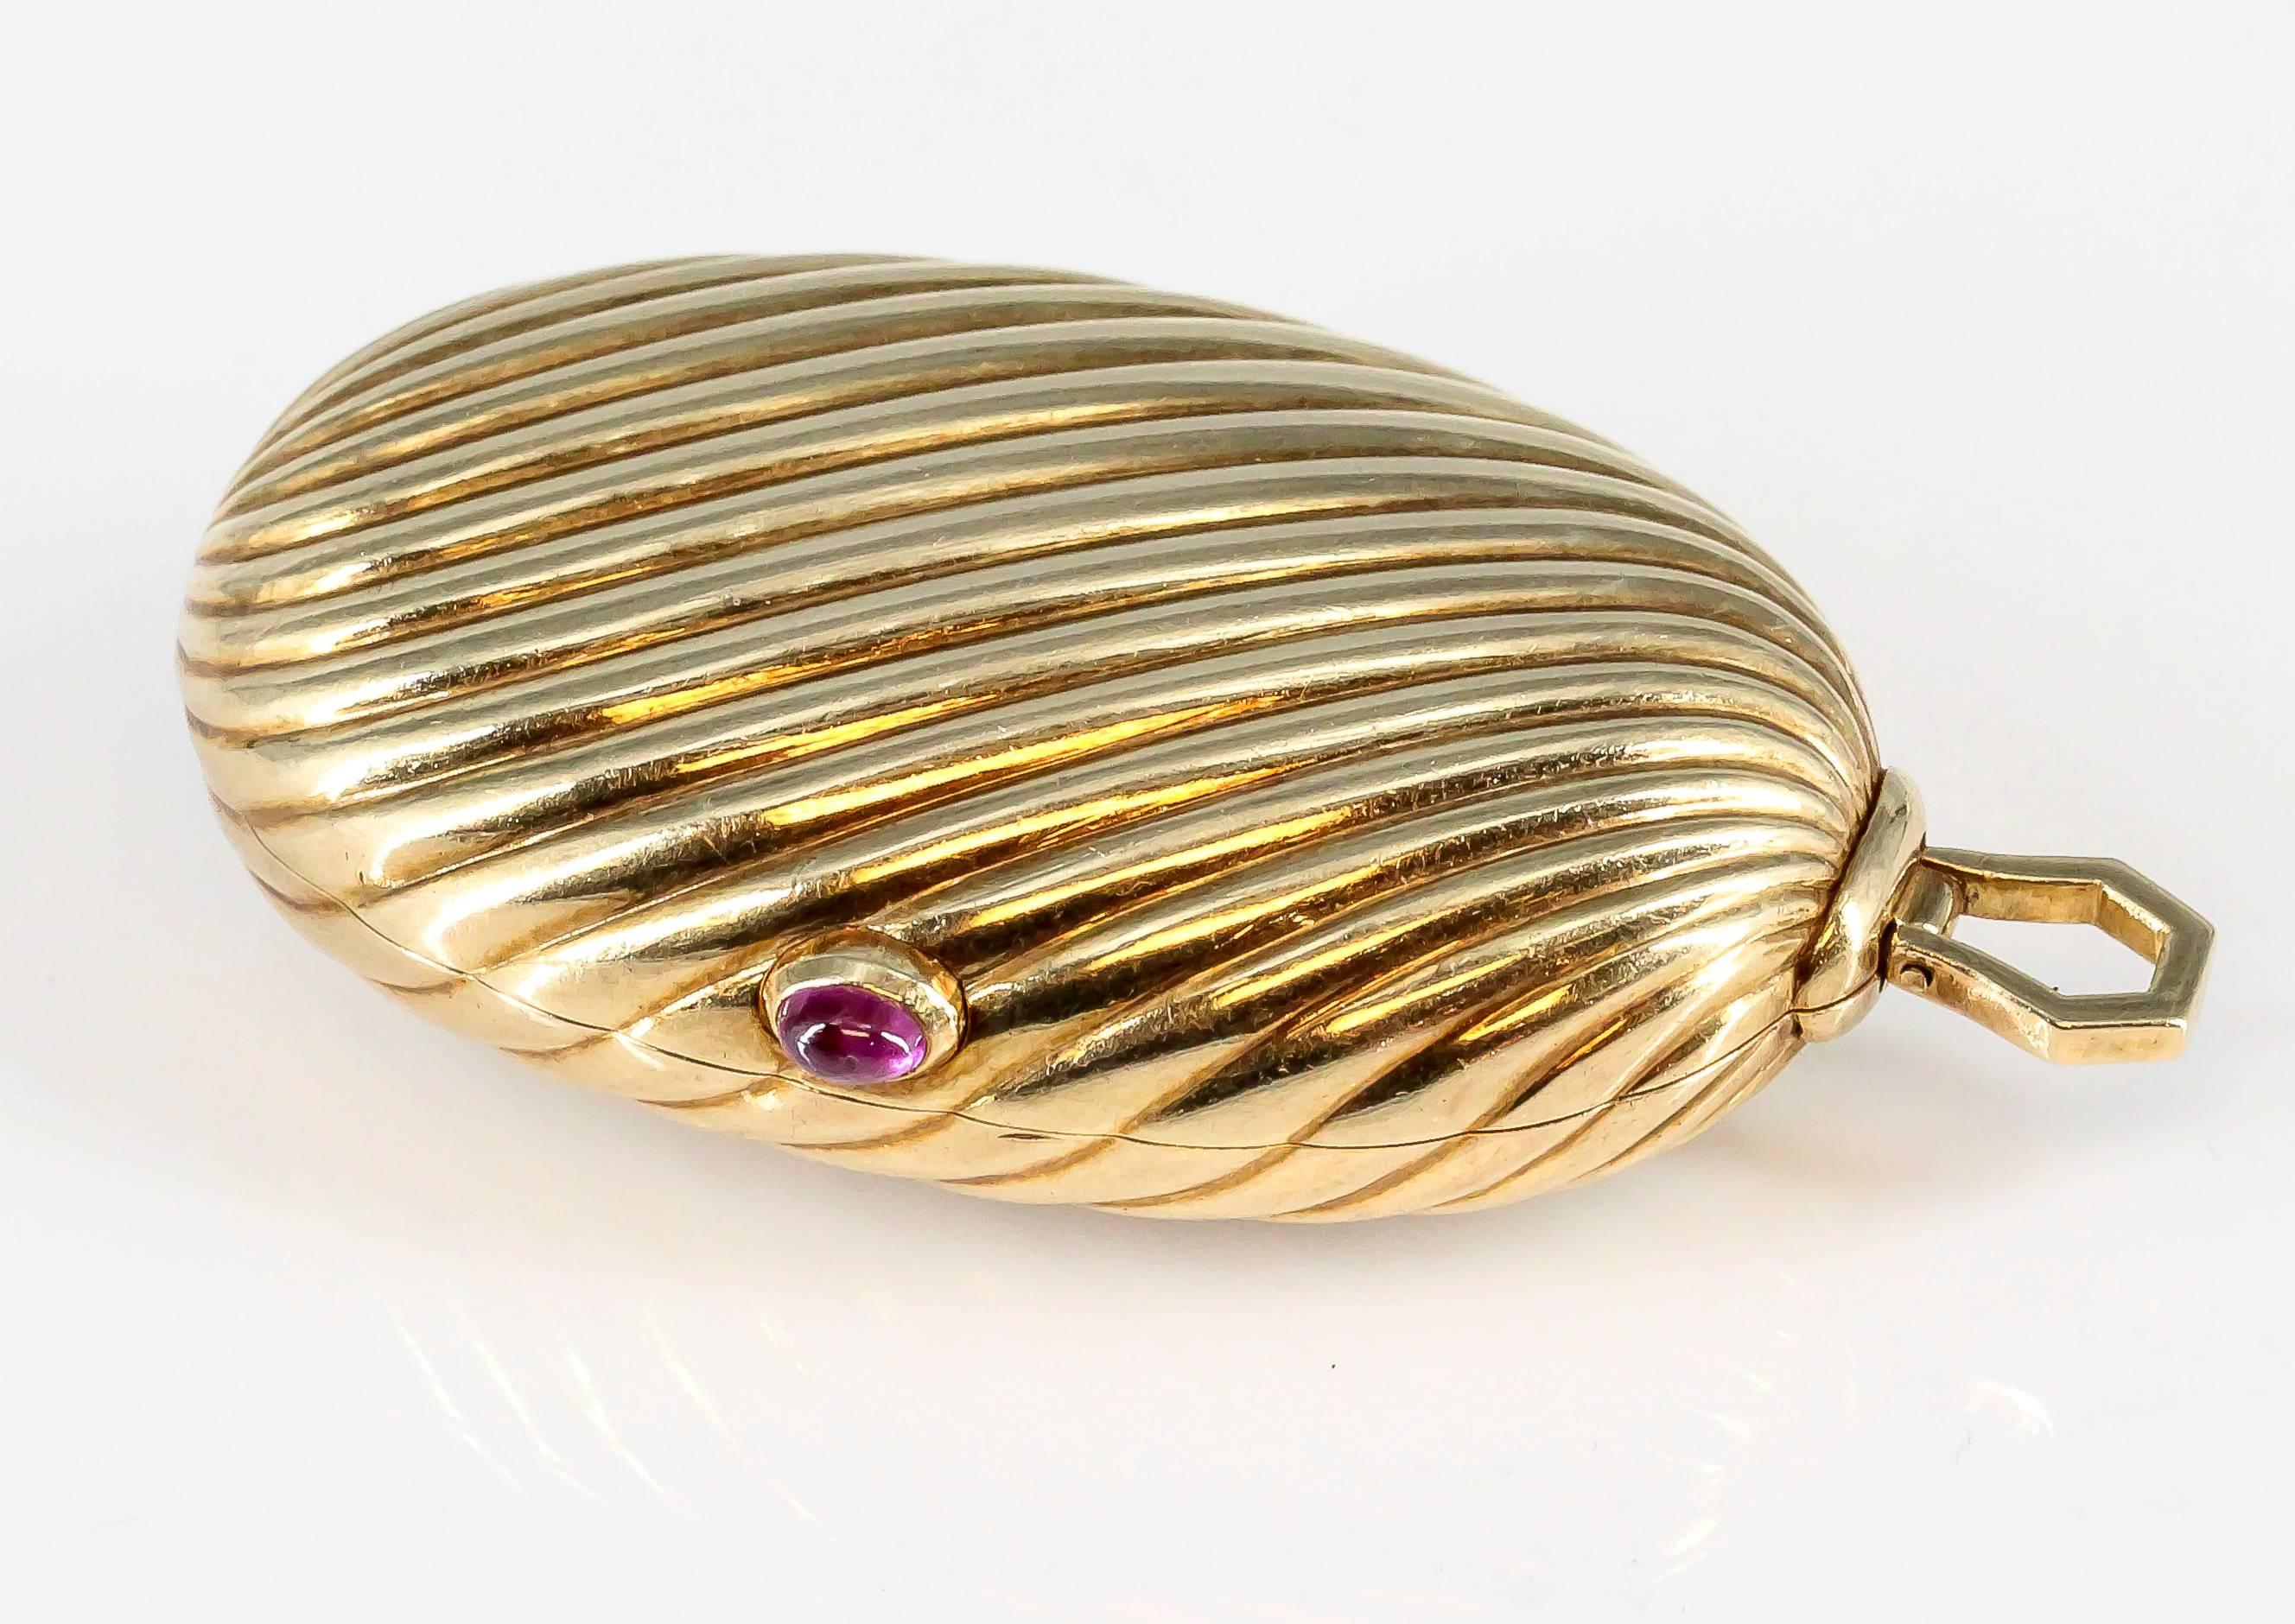 Elegant ruby and 18K yellow gold ribbed pill box by Bulgari. It features a cabochon ruby as an opening button, on an elliptical ribbed design commonly known as the Mellon. Beautifully made and ease to use.

Hallmarks: Bulgari, 750, maker's mark.